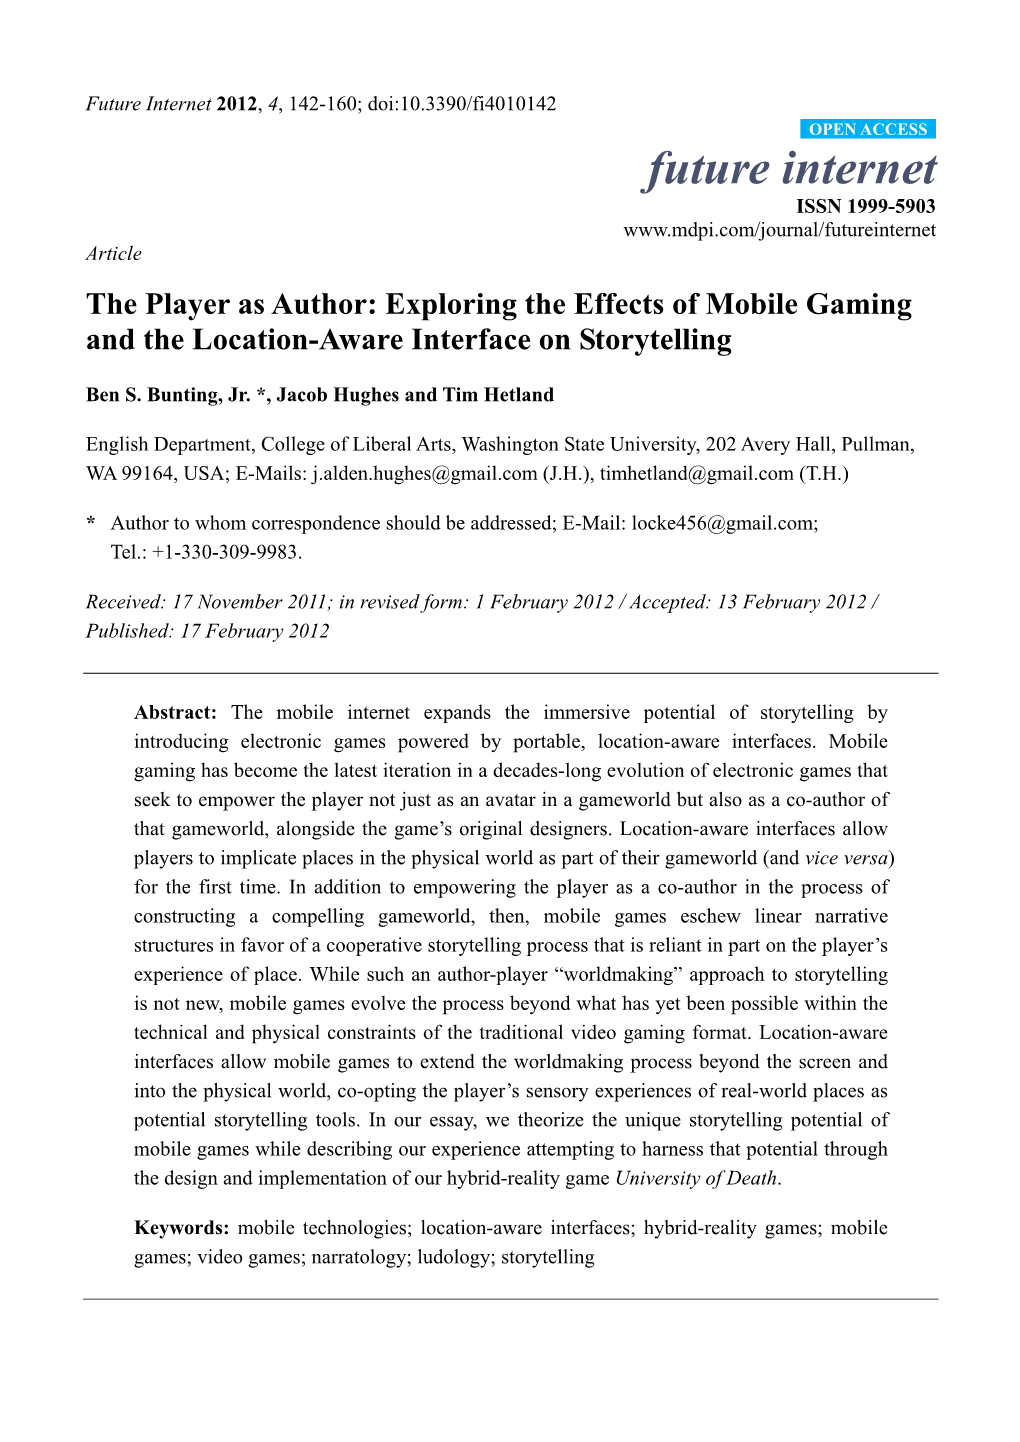 Exploring the Effects of Mobile Gaming and the Location-Aware Interface on Storytelling